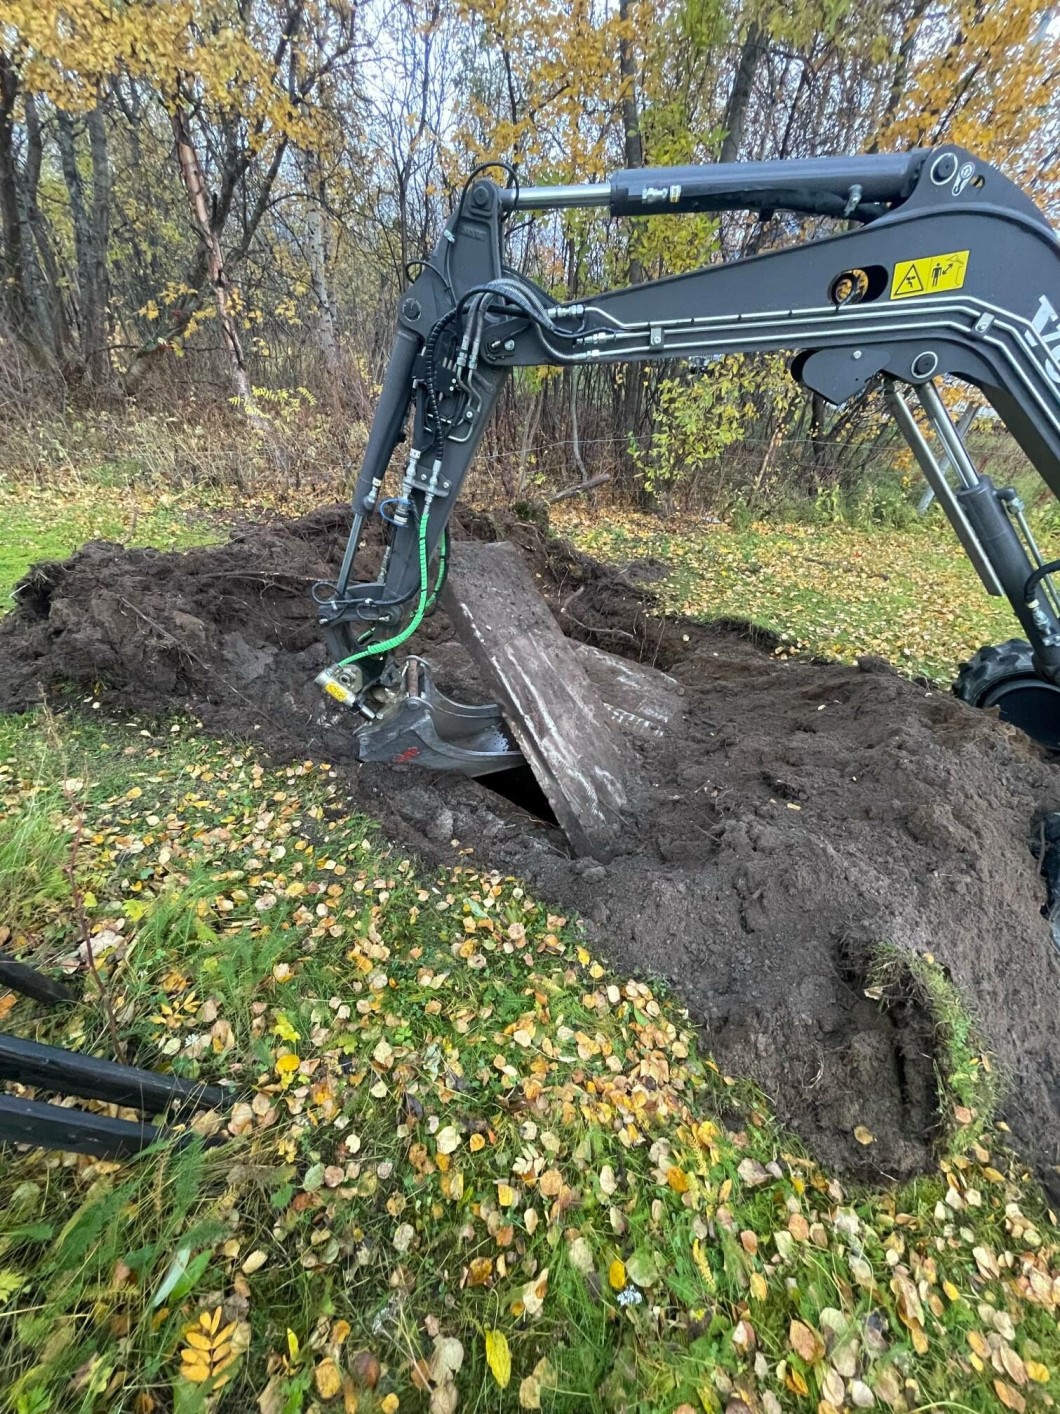 Daniel Valstad received help from a neighbor using an excavator.